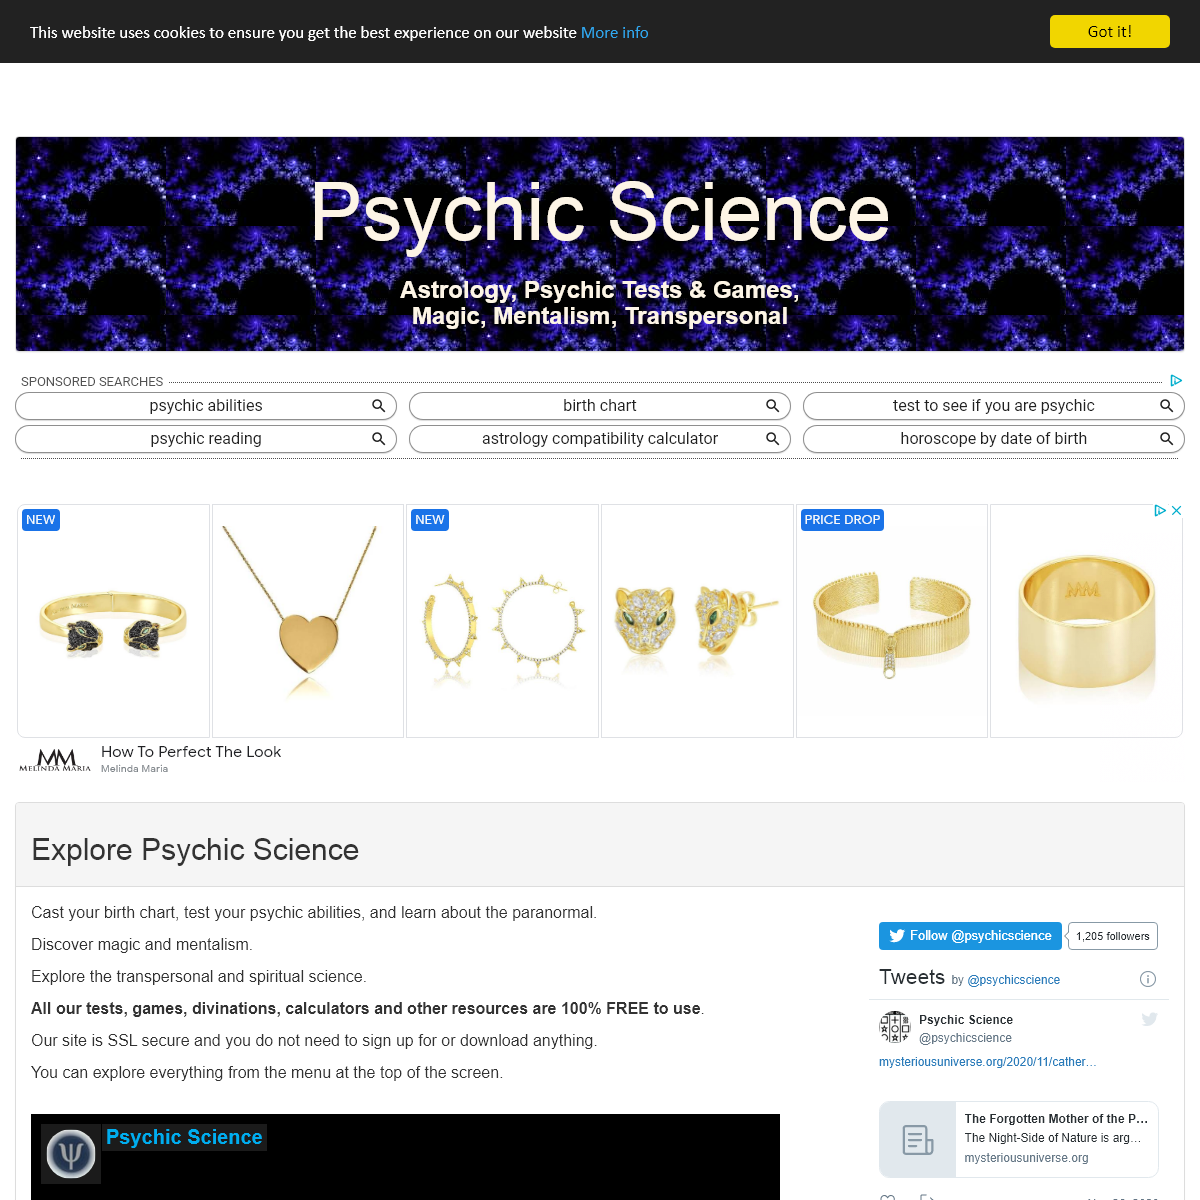 A complete backup of psychicscience.org